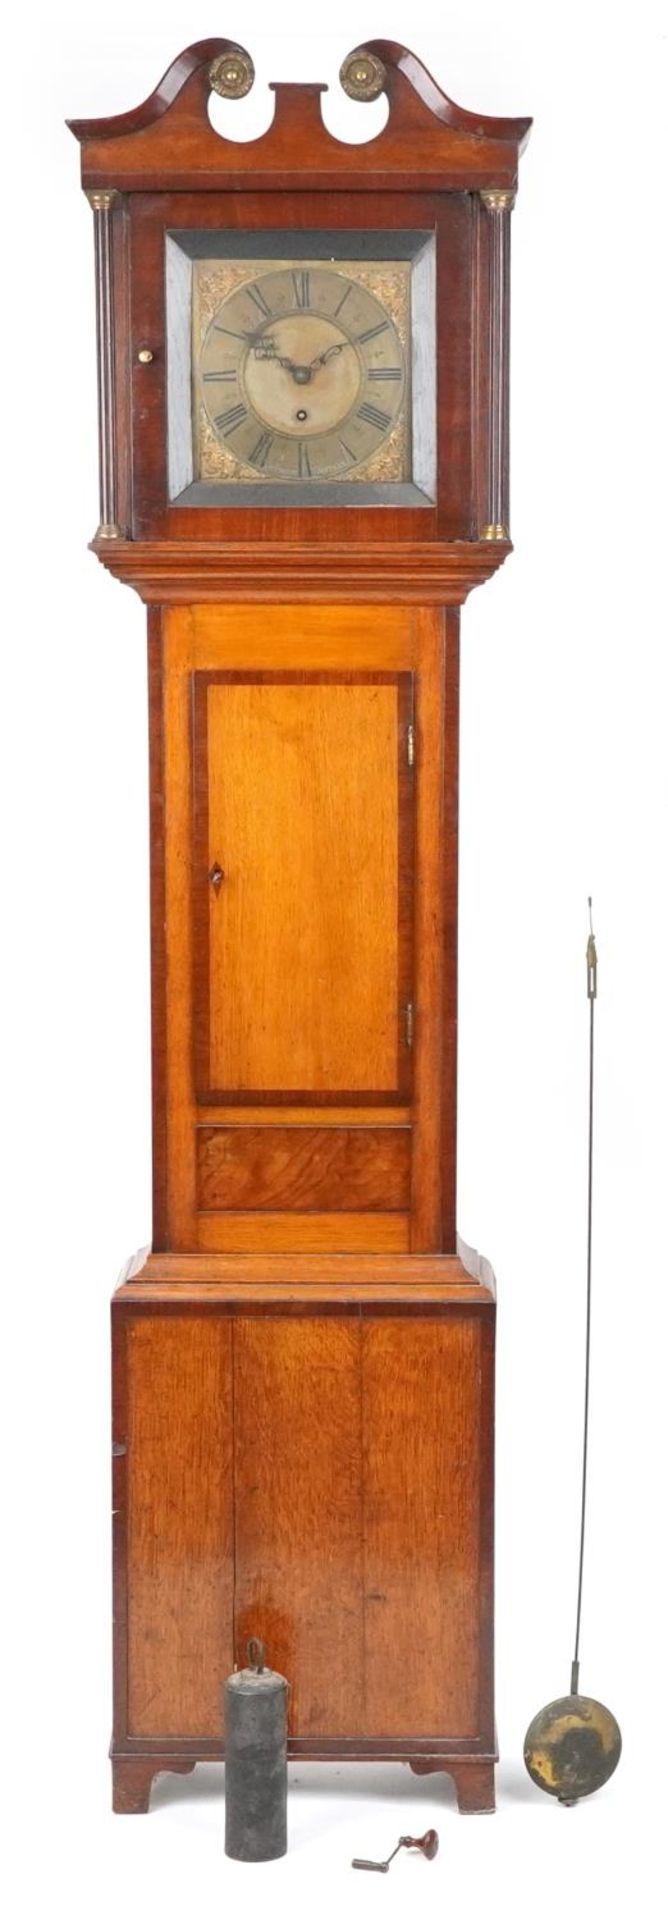 19th century inlaid oak cased grandfather clock with brass dial having Roman numerals, engraved - Image 4 of 6